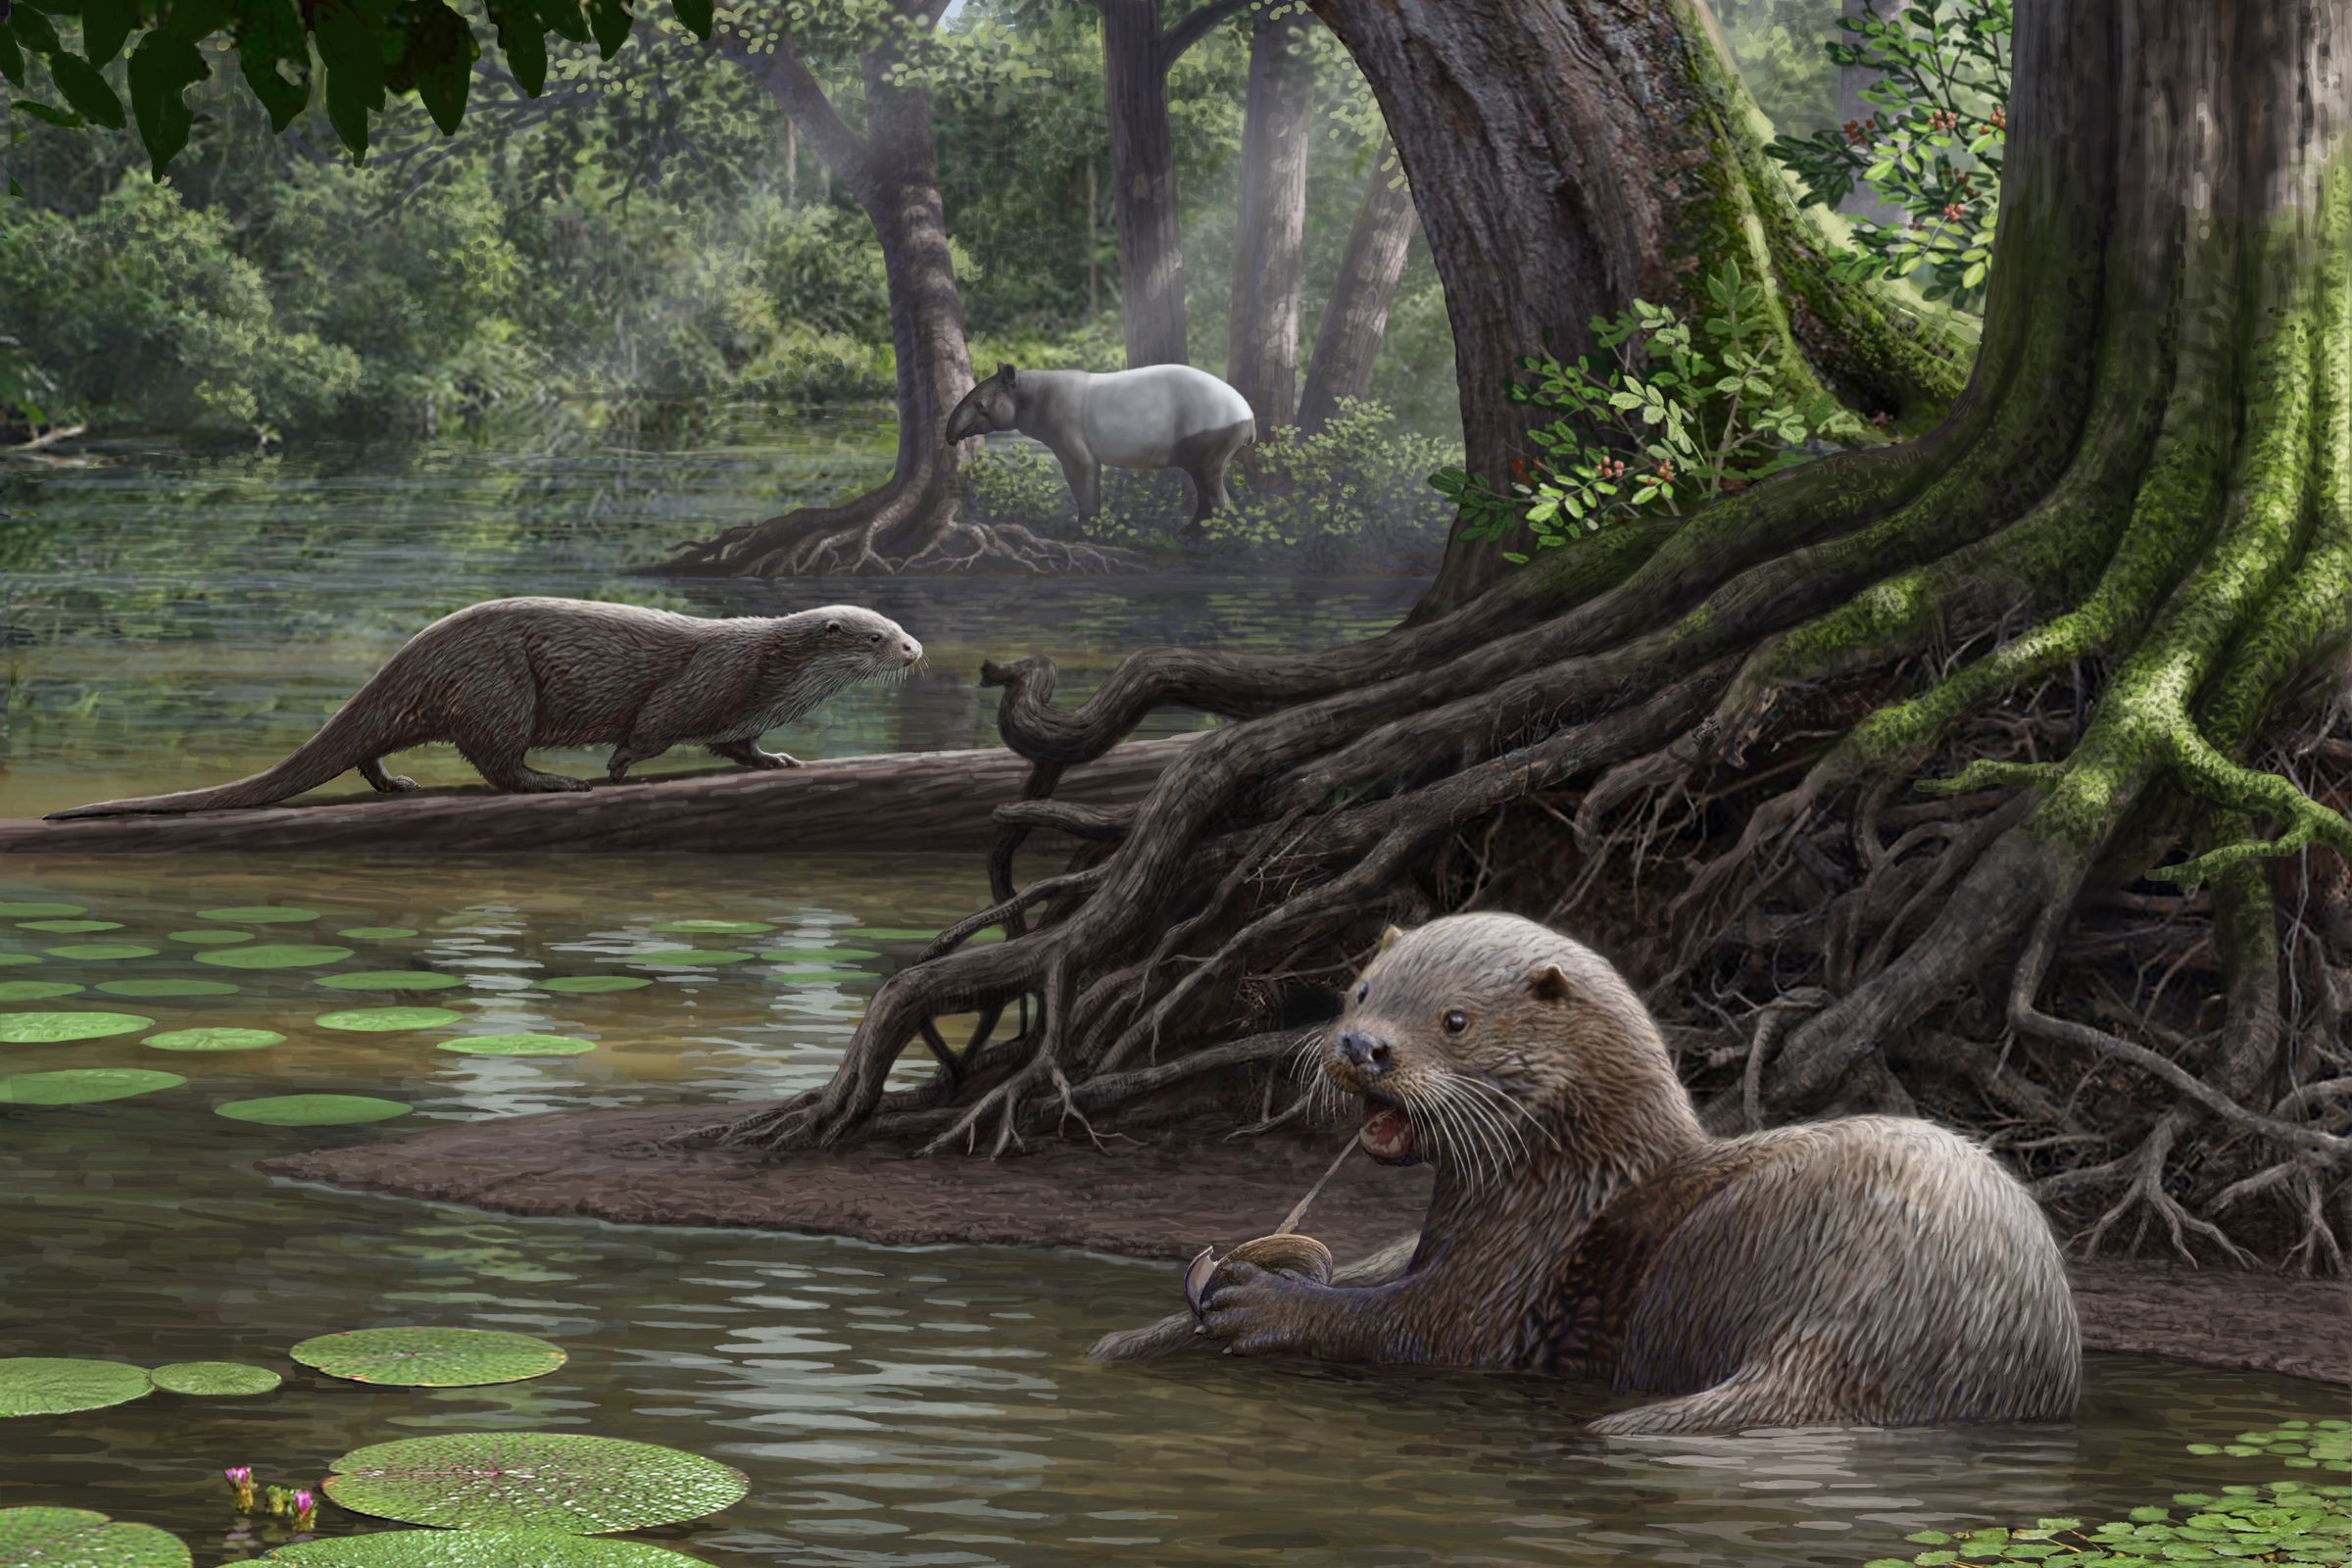 An artist’s rendering of this massive, prehistoric otter tearing into a snack with its powerful jaws. 